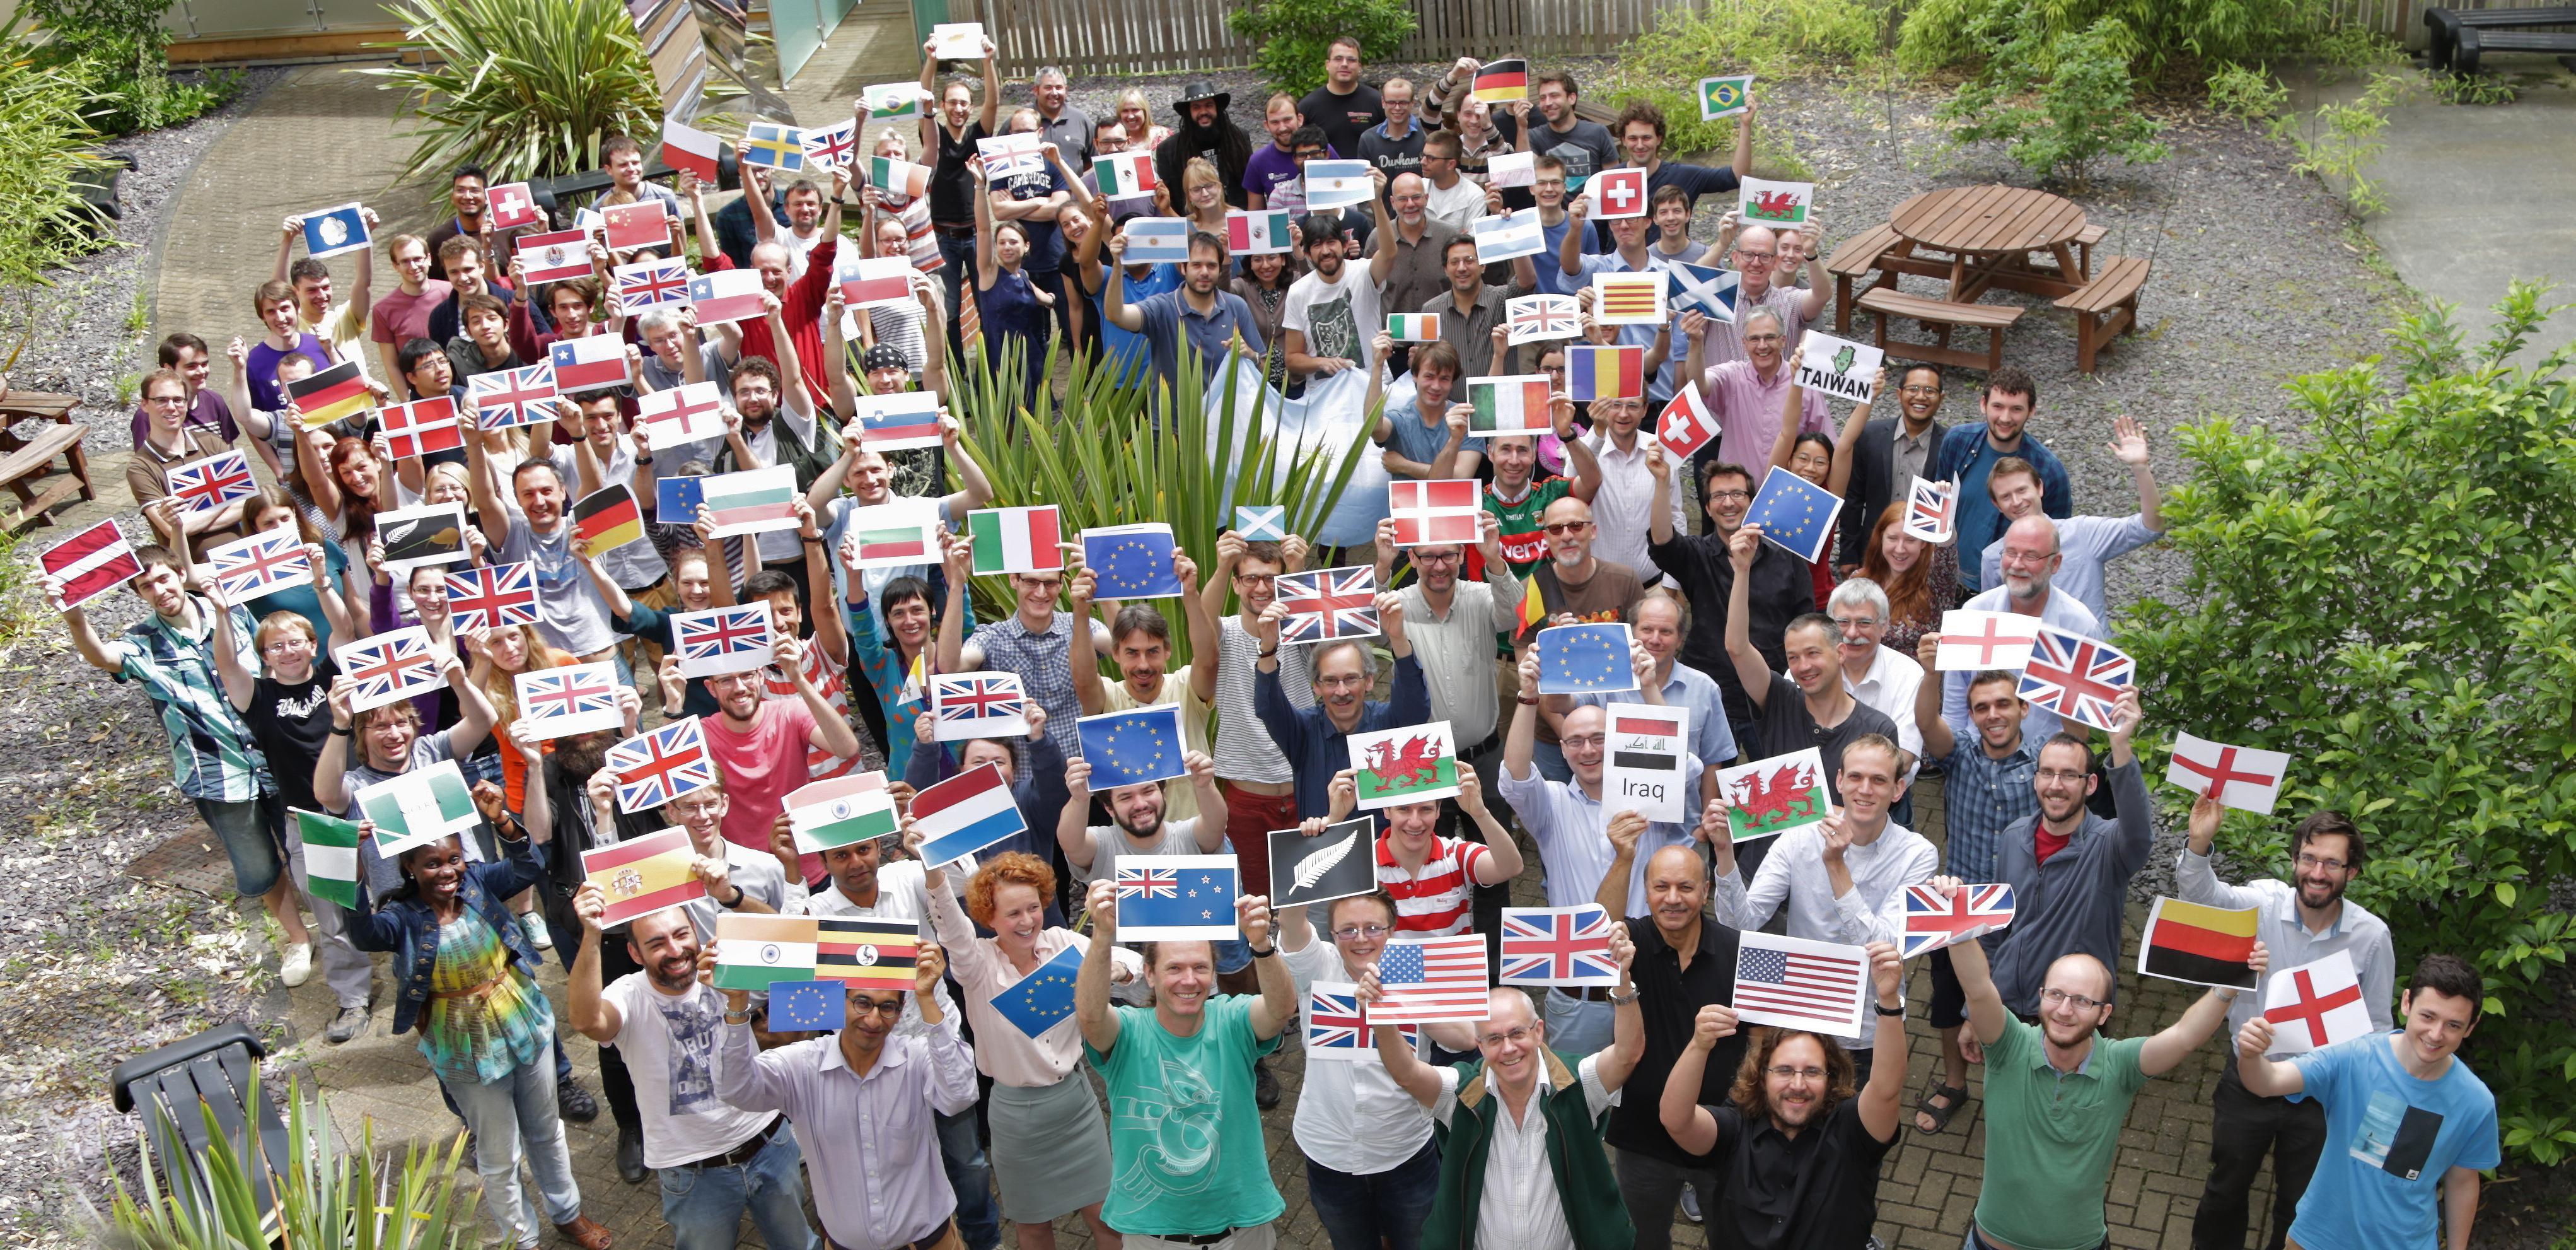 Big group photo of our many international staff and students holding up the flags of the countires they are from.